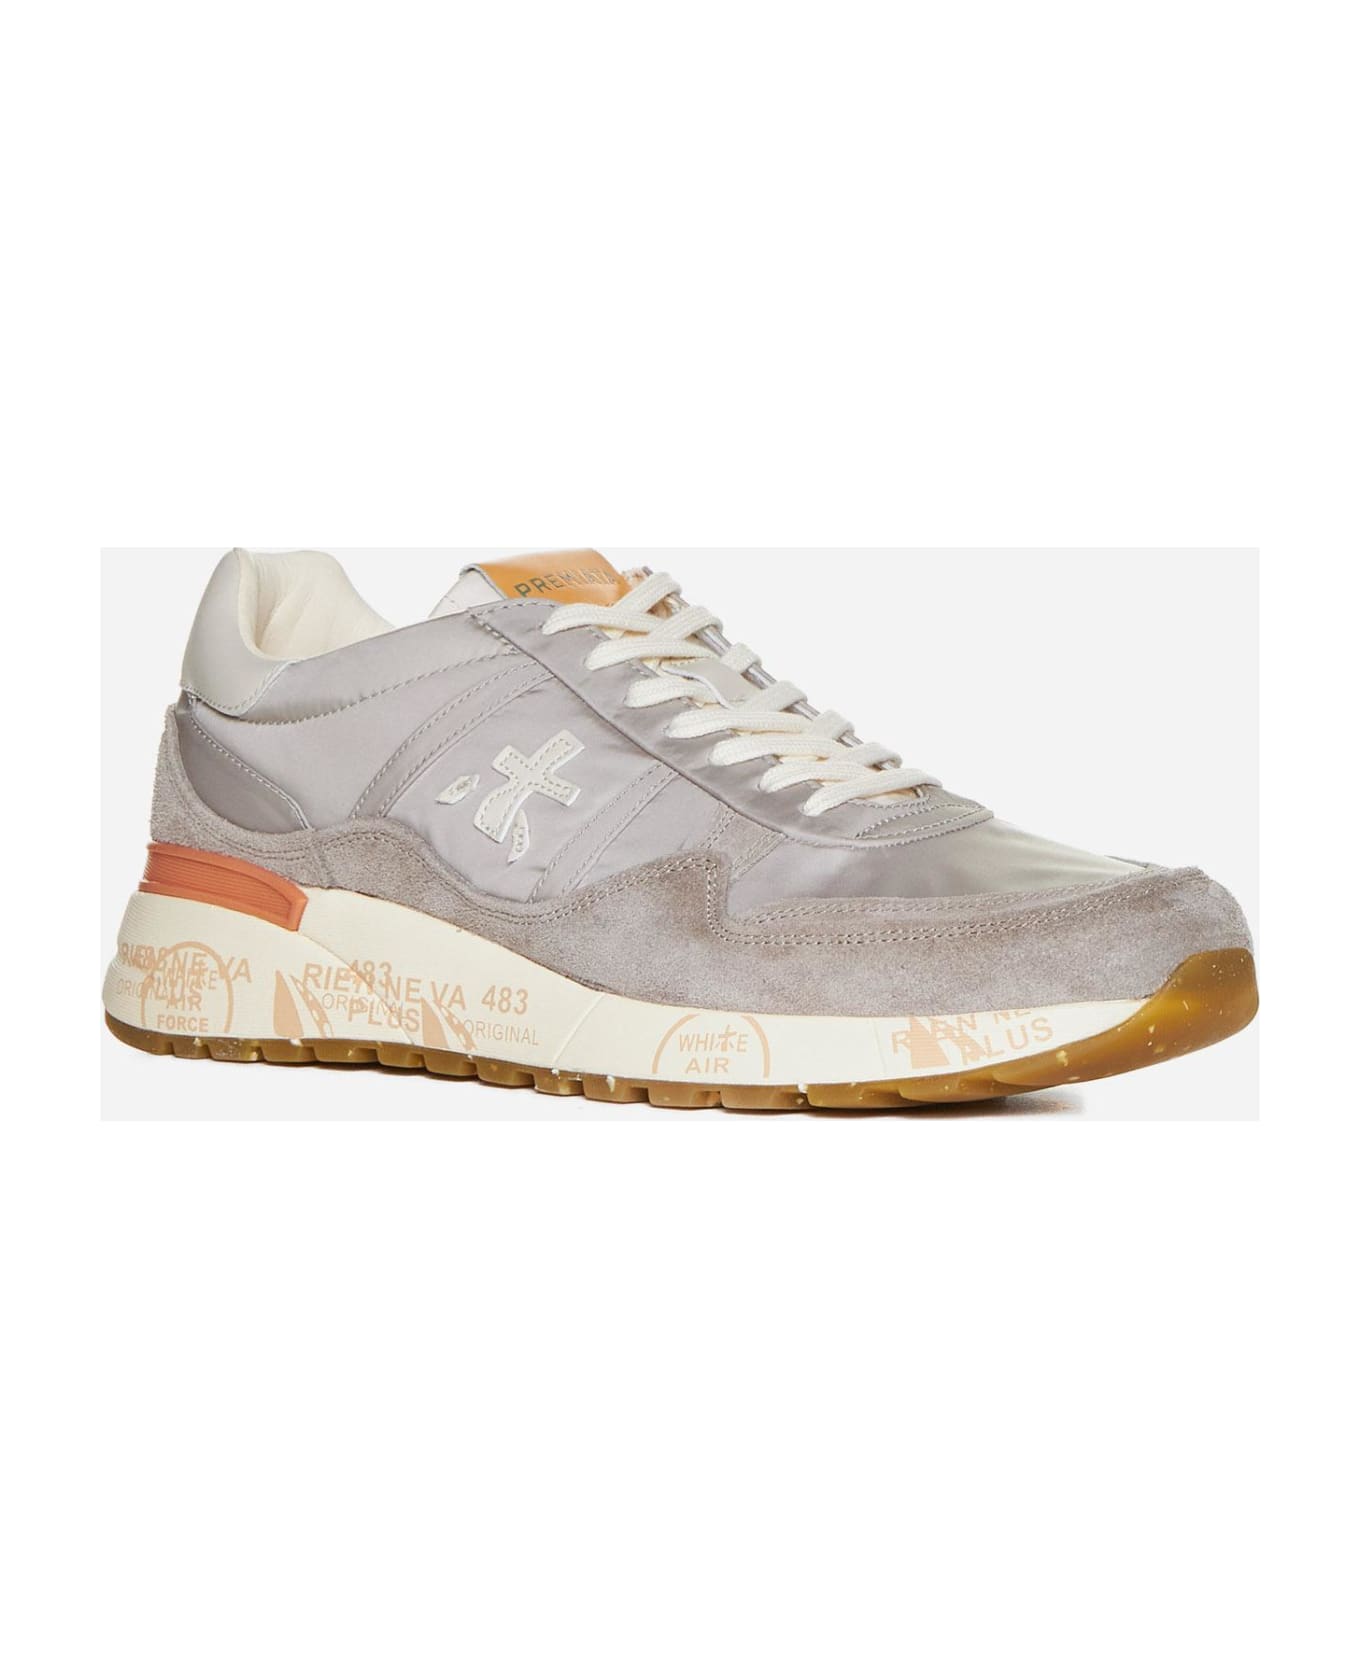 Premiata Landeck Leather, Nylon And Suede Sneakers - Grey